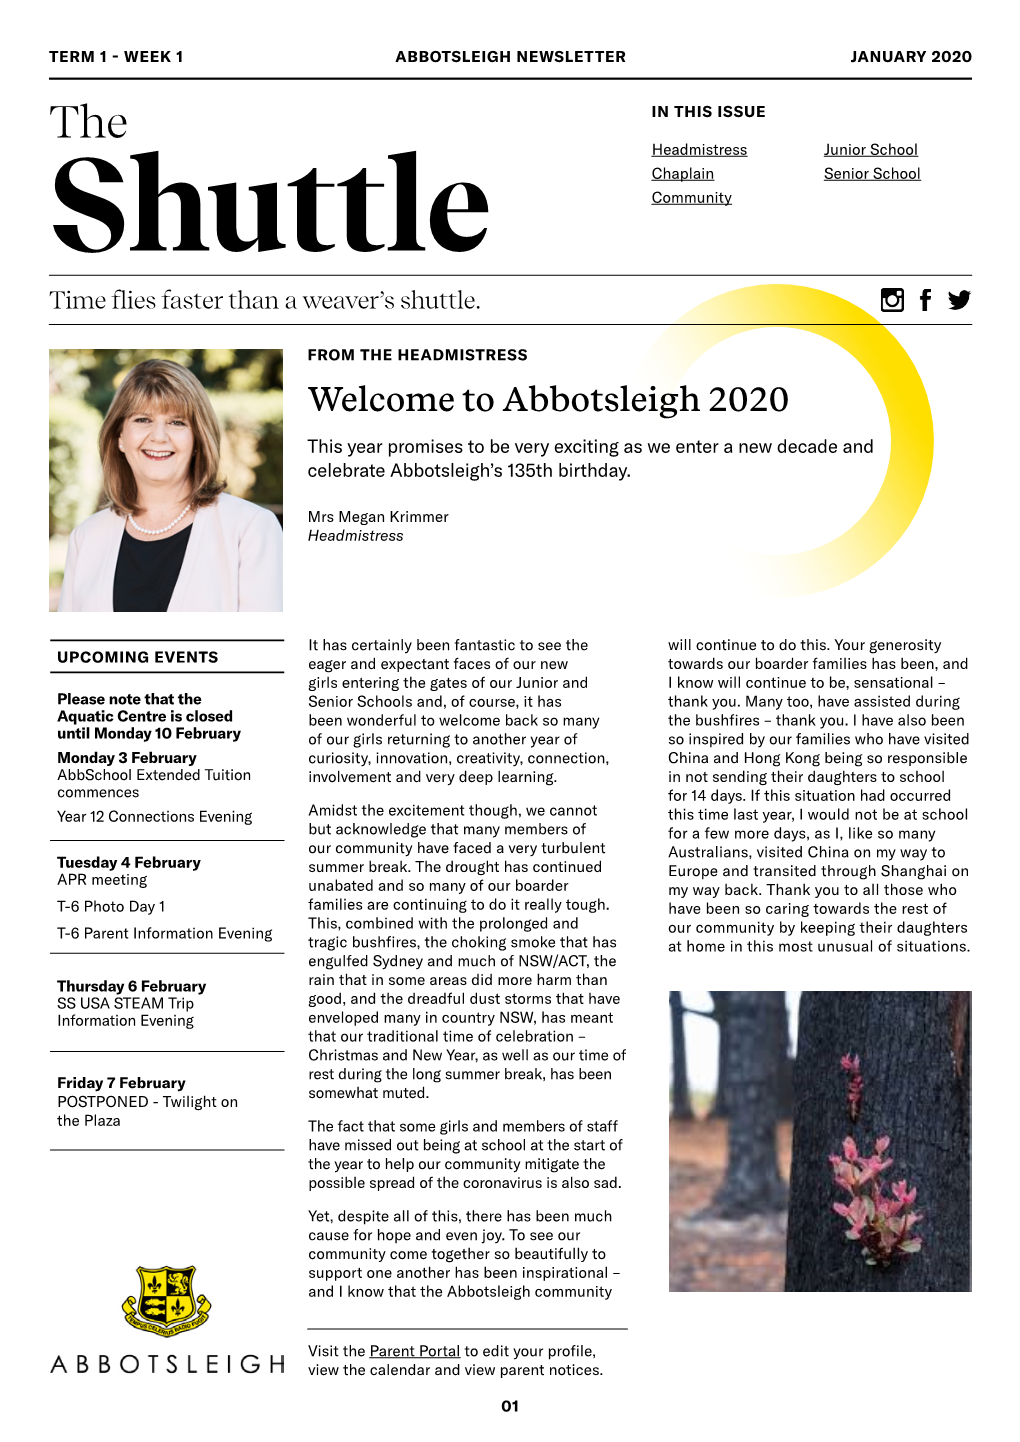 Welcome to Abbotsleigh 2020 This Year Promises to Be Very Exciting As We Enter a New Decade and Celebrate Abbotsleigh’S 135Th Birthday